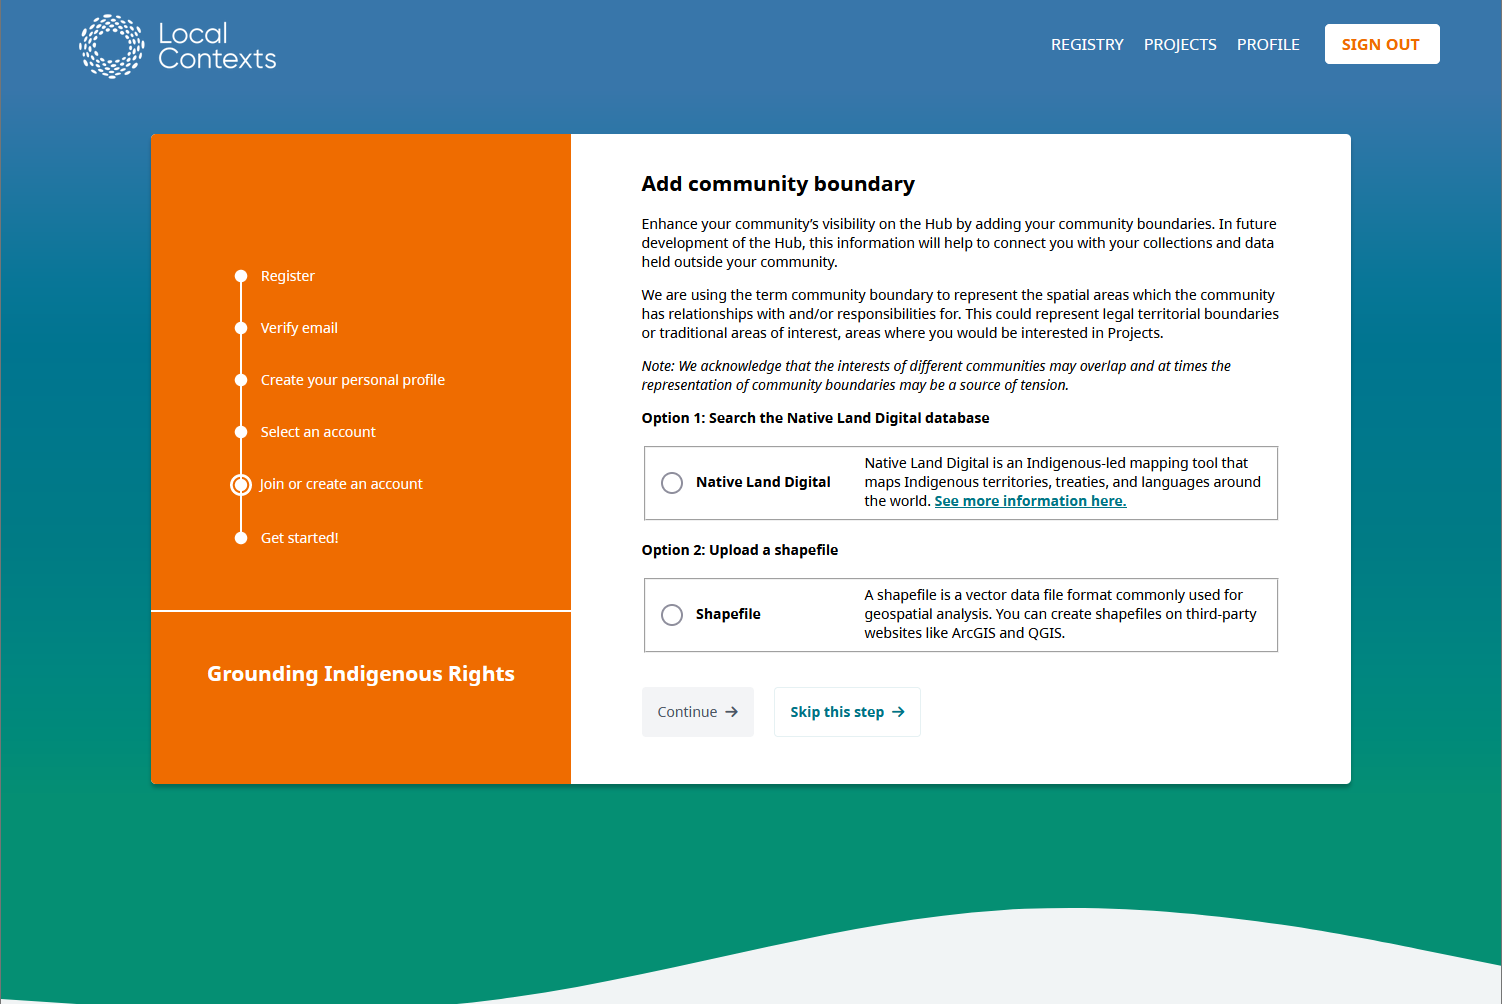 Screenshot of the add community boundary page in community account registration. Two options are shown, search the Native Land Digital database or upload a shapefile.